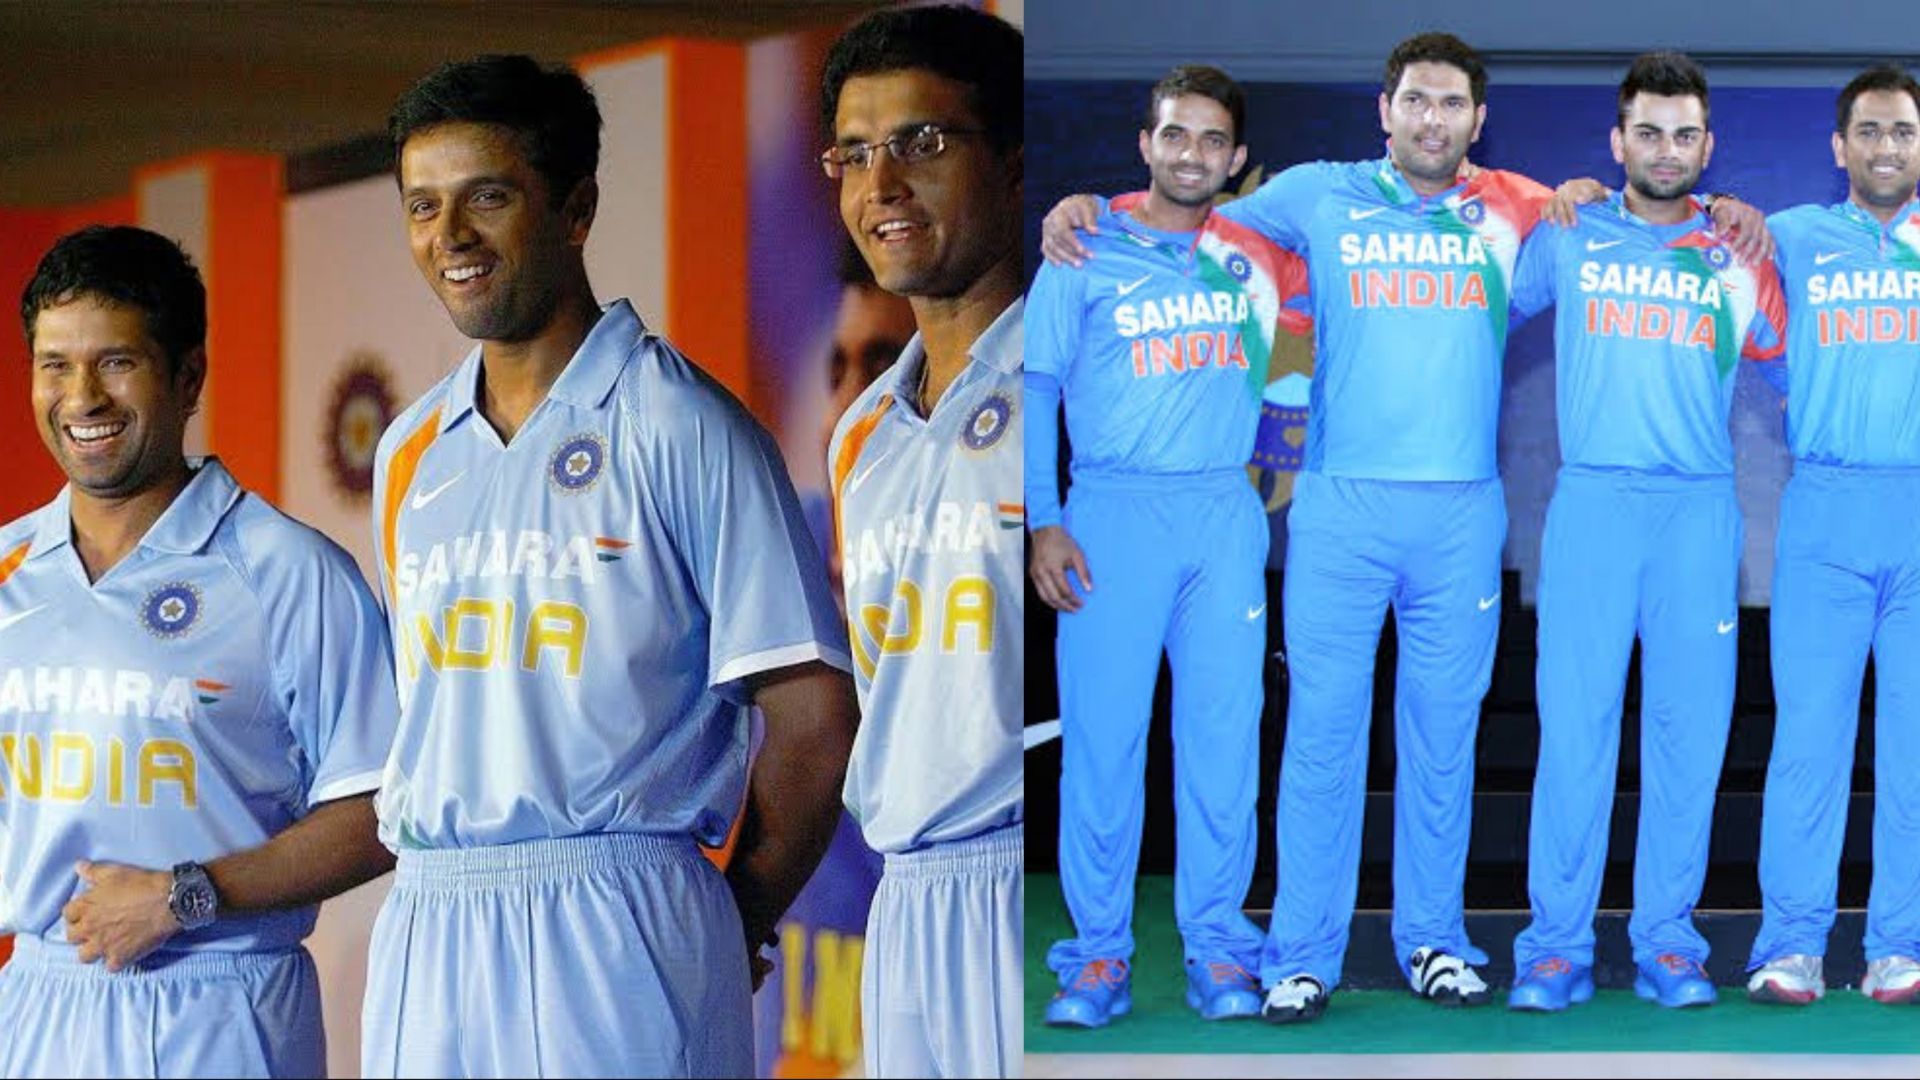 Team India has been a part of all T20 World Cups played so far 